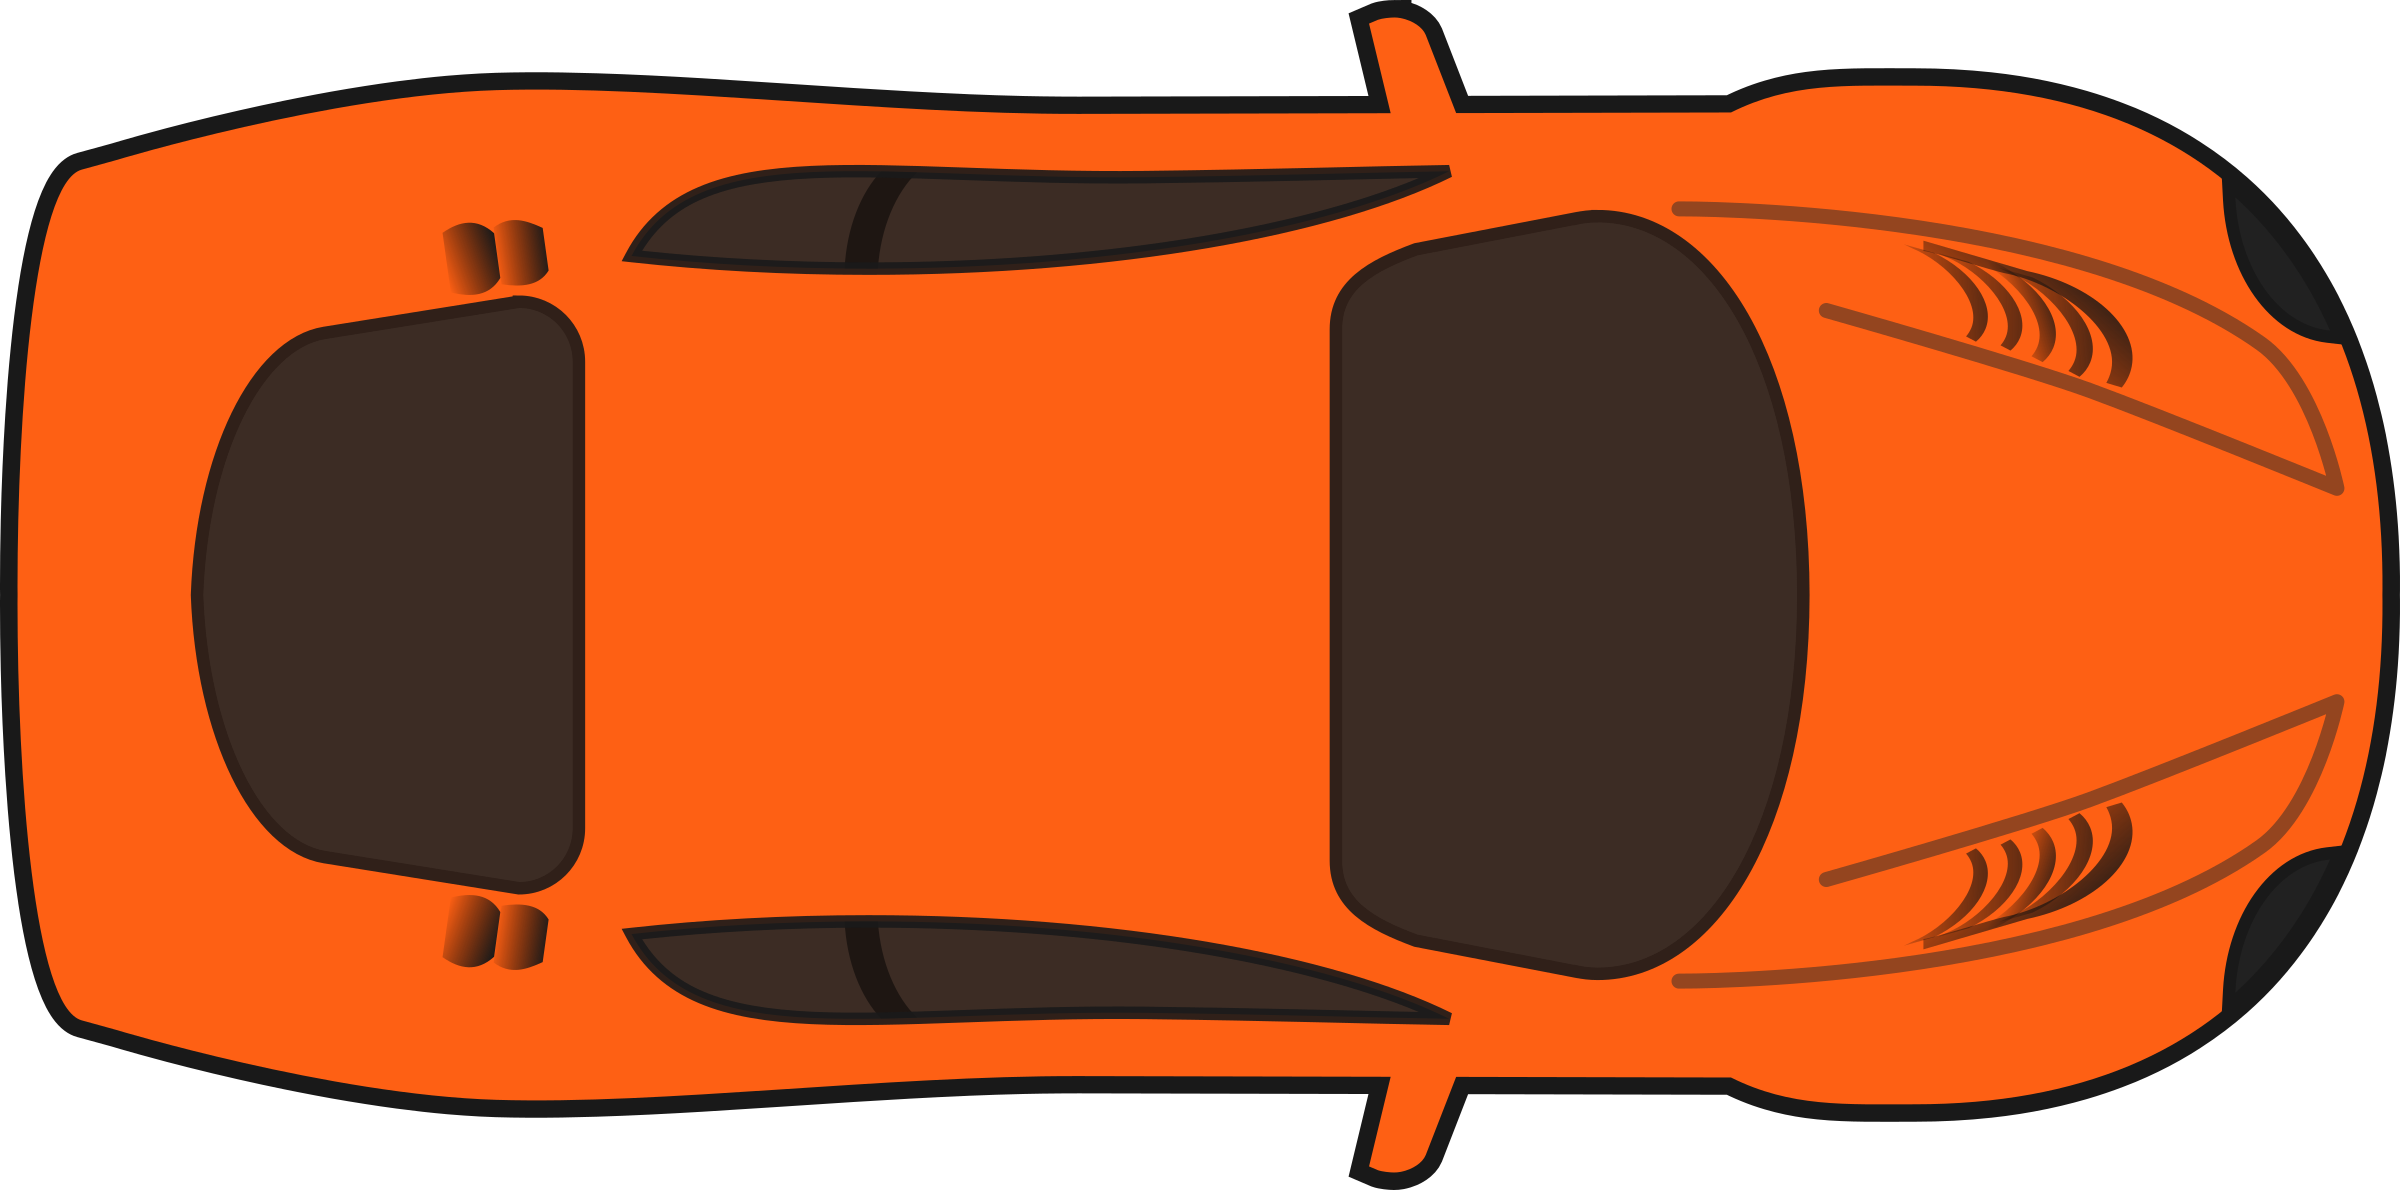 Orange Racing Car  Top View  By Qubodup